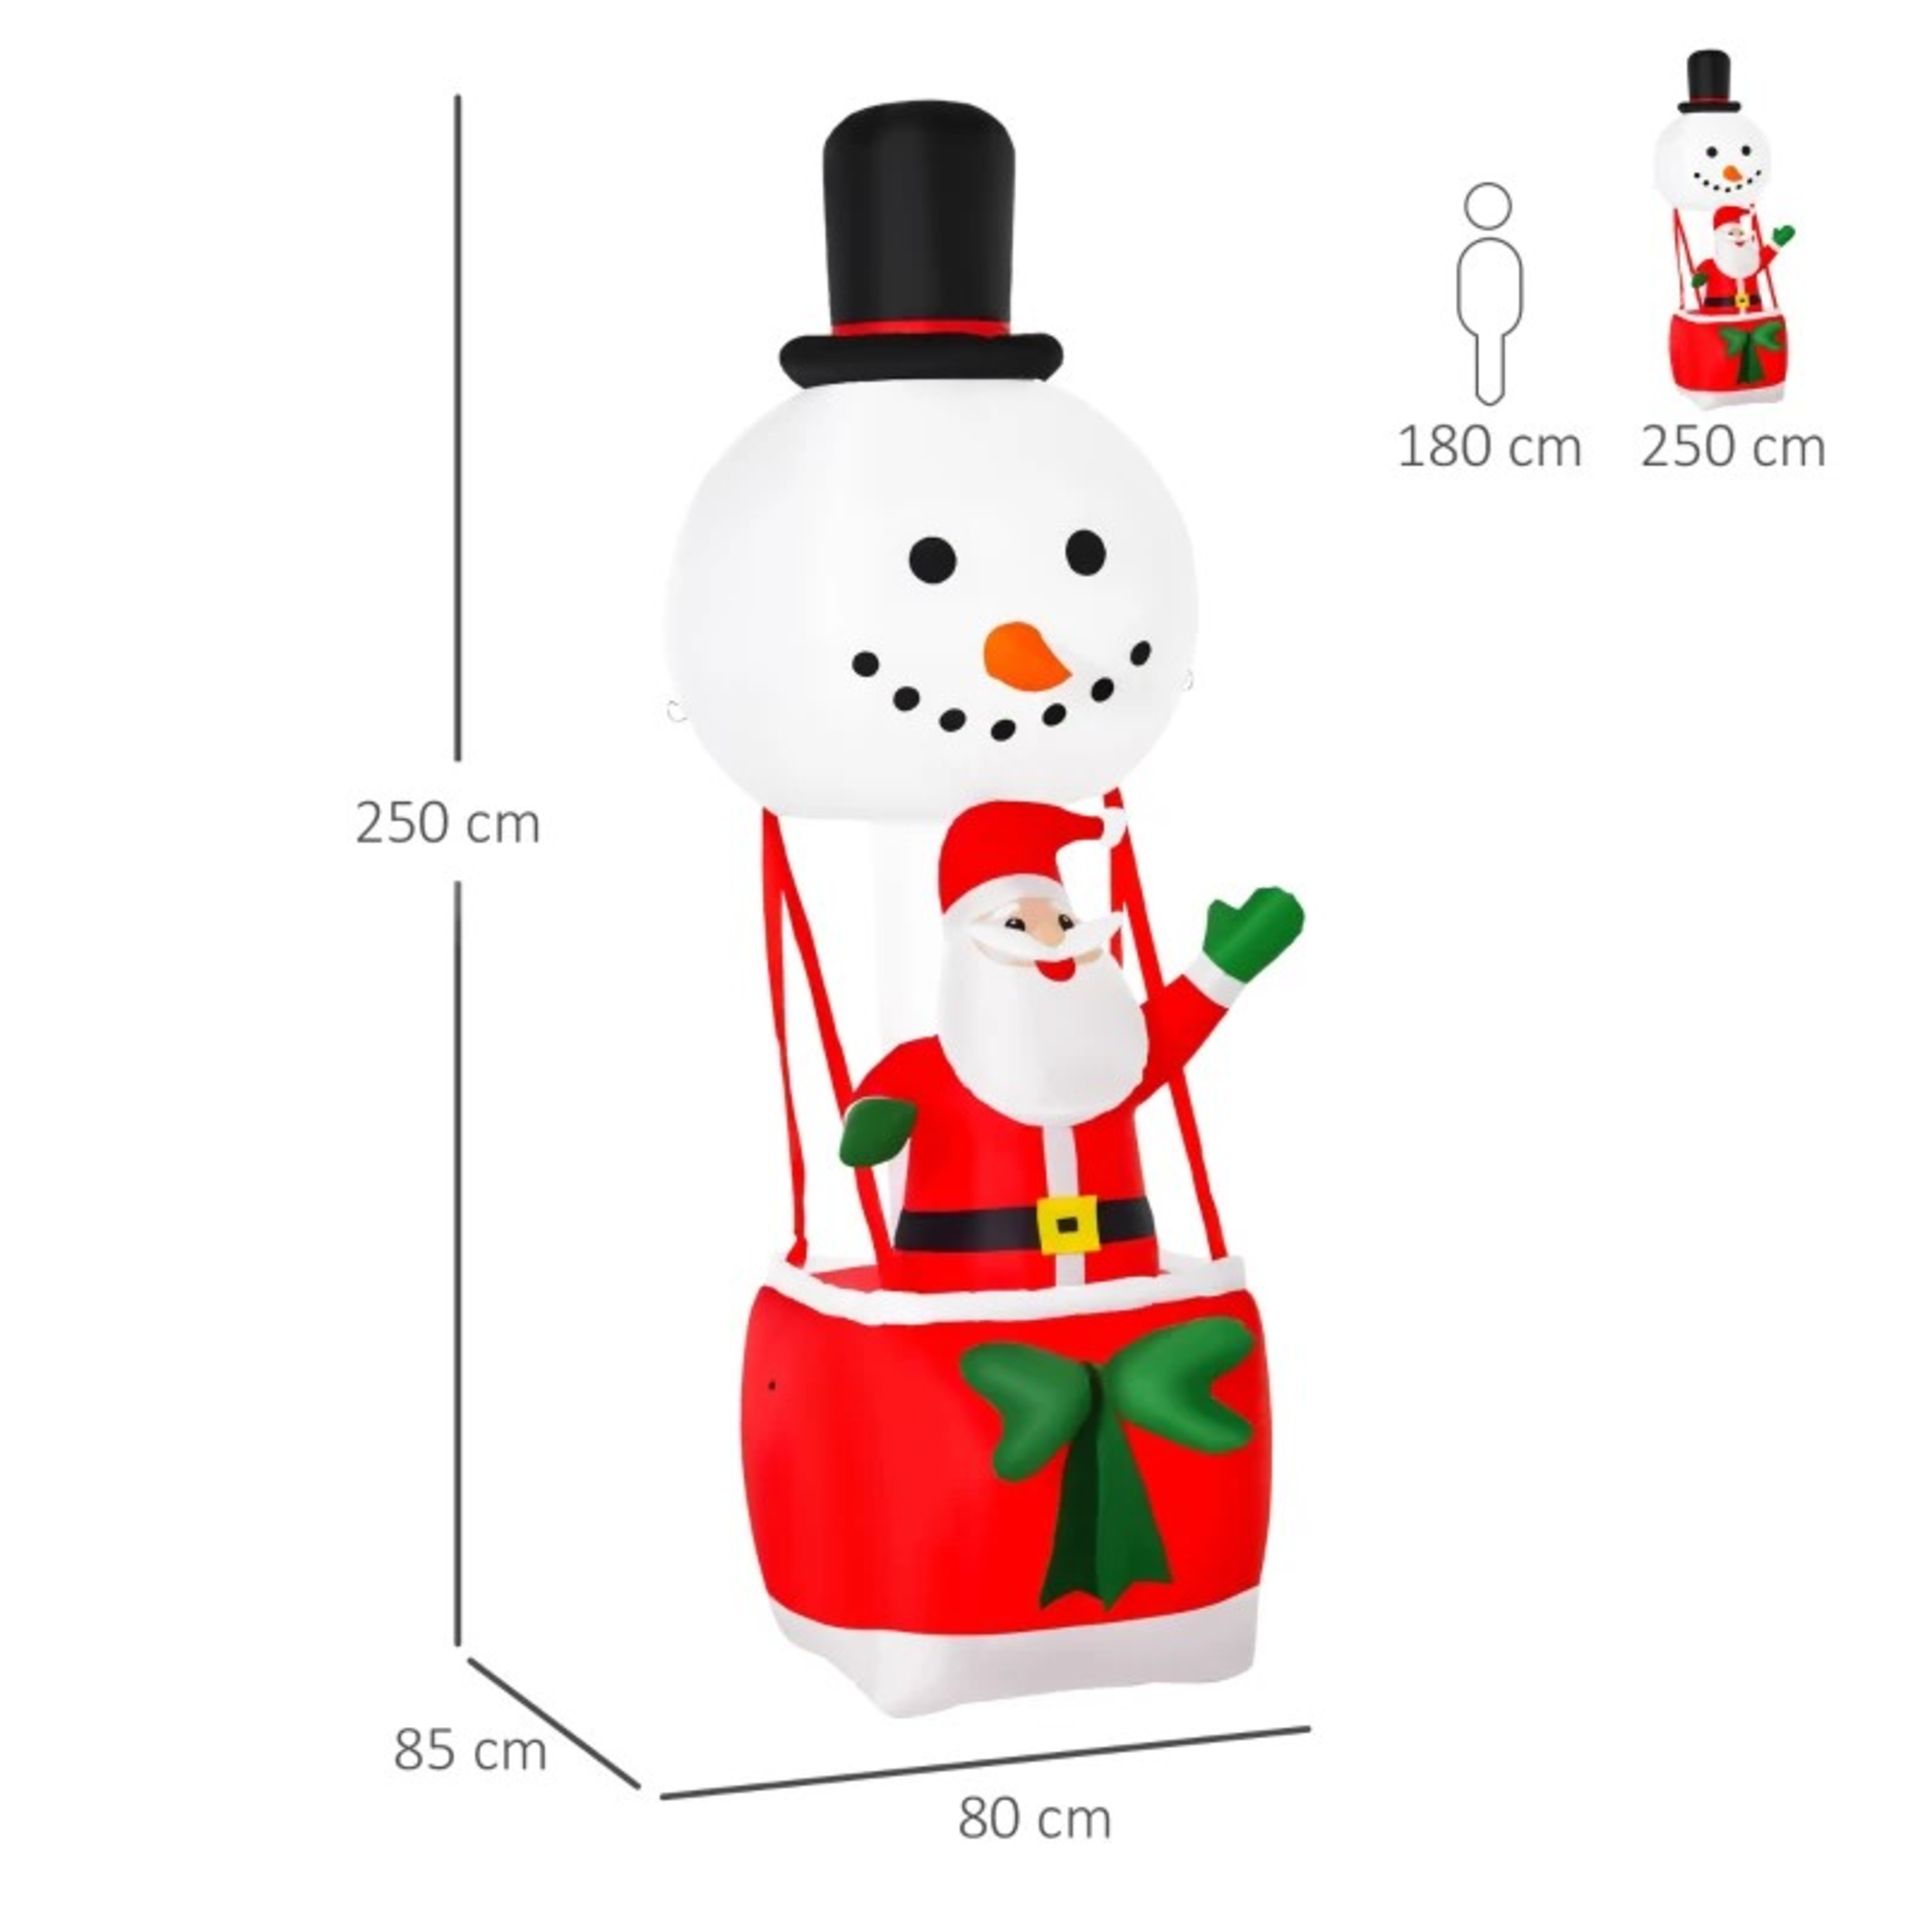 RRP £66.99 - HOMCOM 2.5m Christmas Inflatables Santa Claus on Hot Air Balloon Light Up Decor Party - - Image 2 of 4